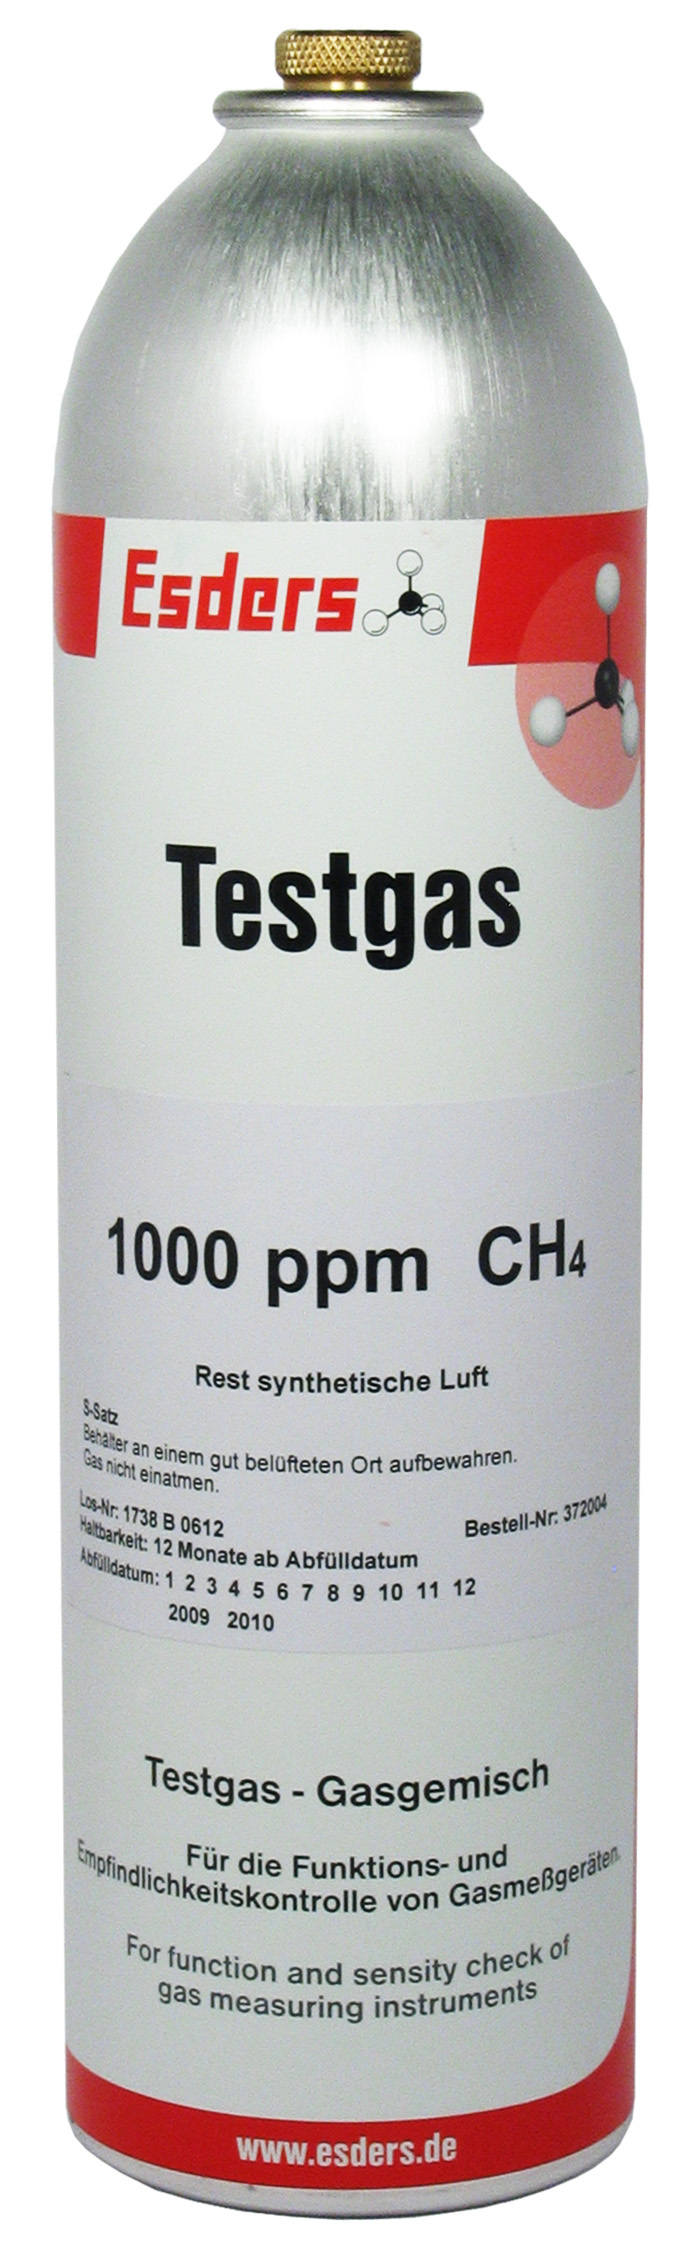 Test gas can 1000 ppm methane